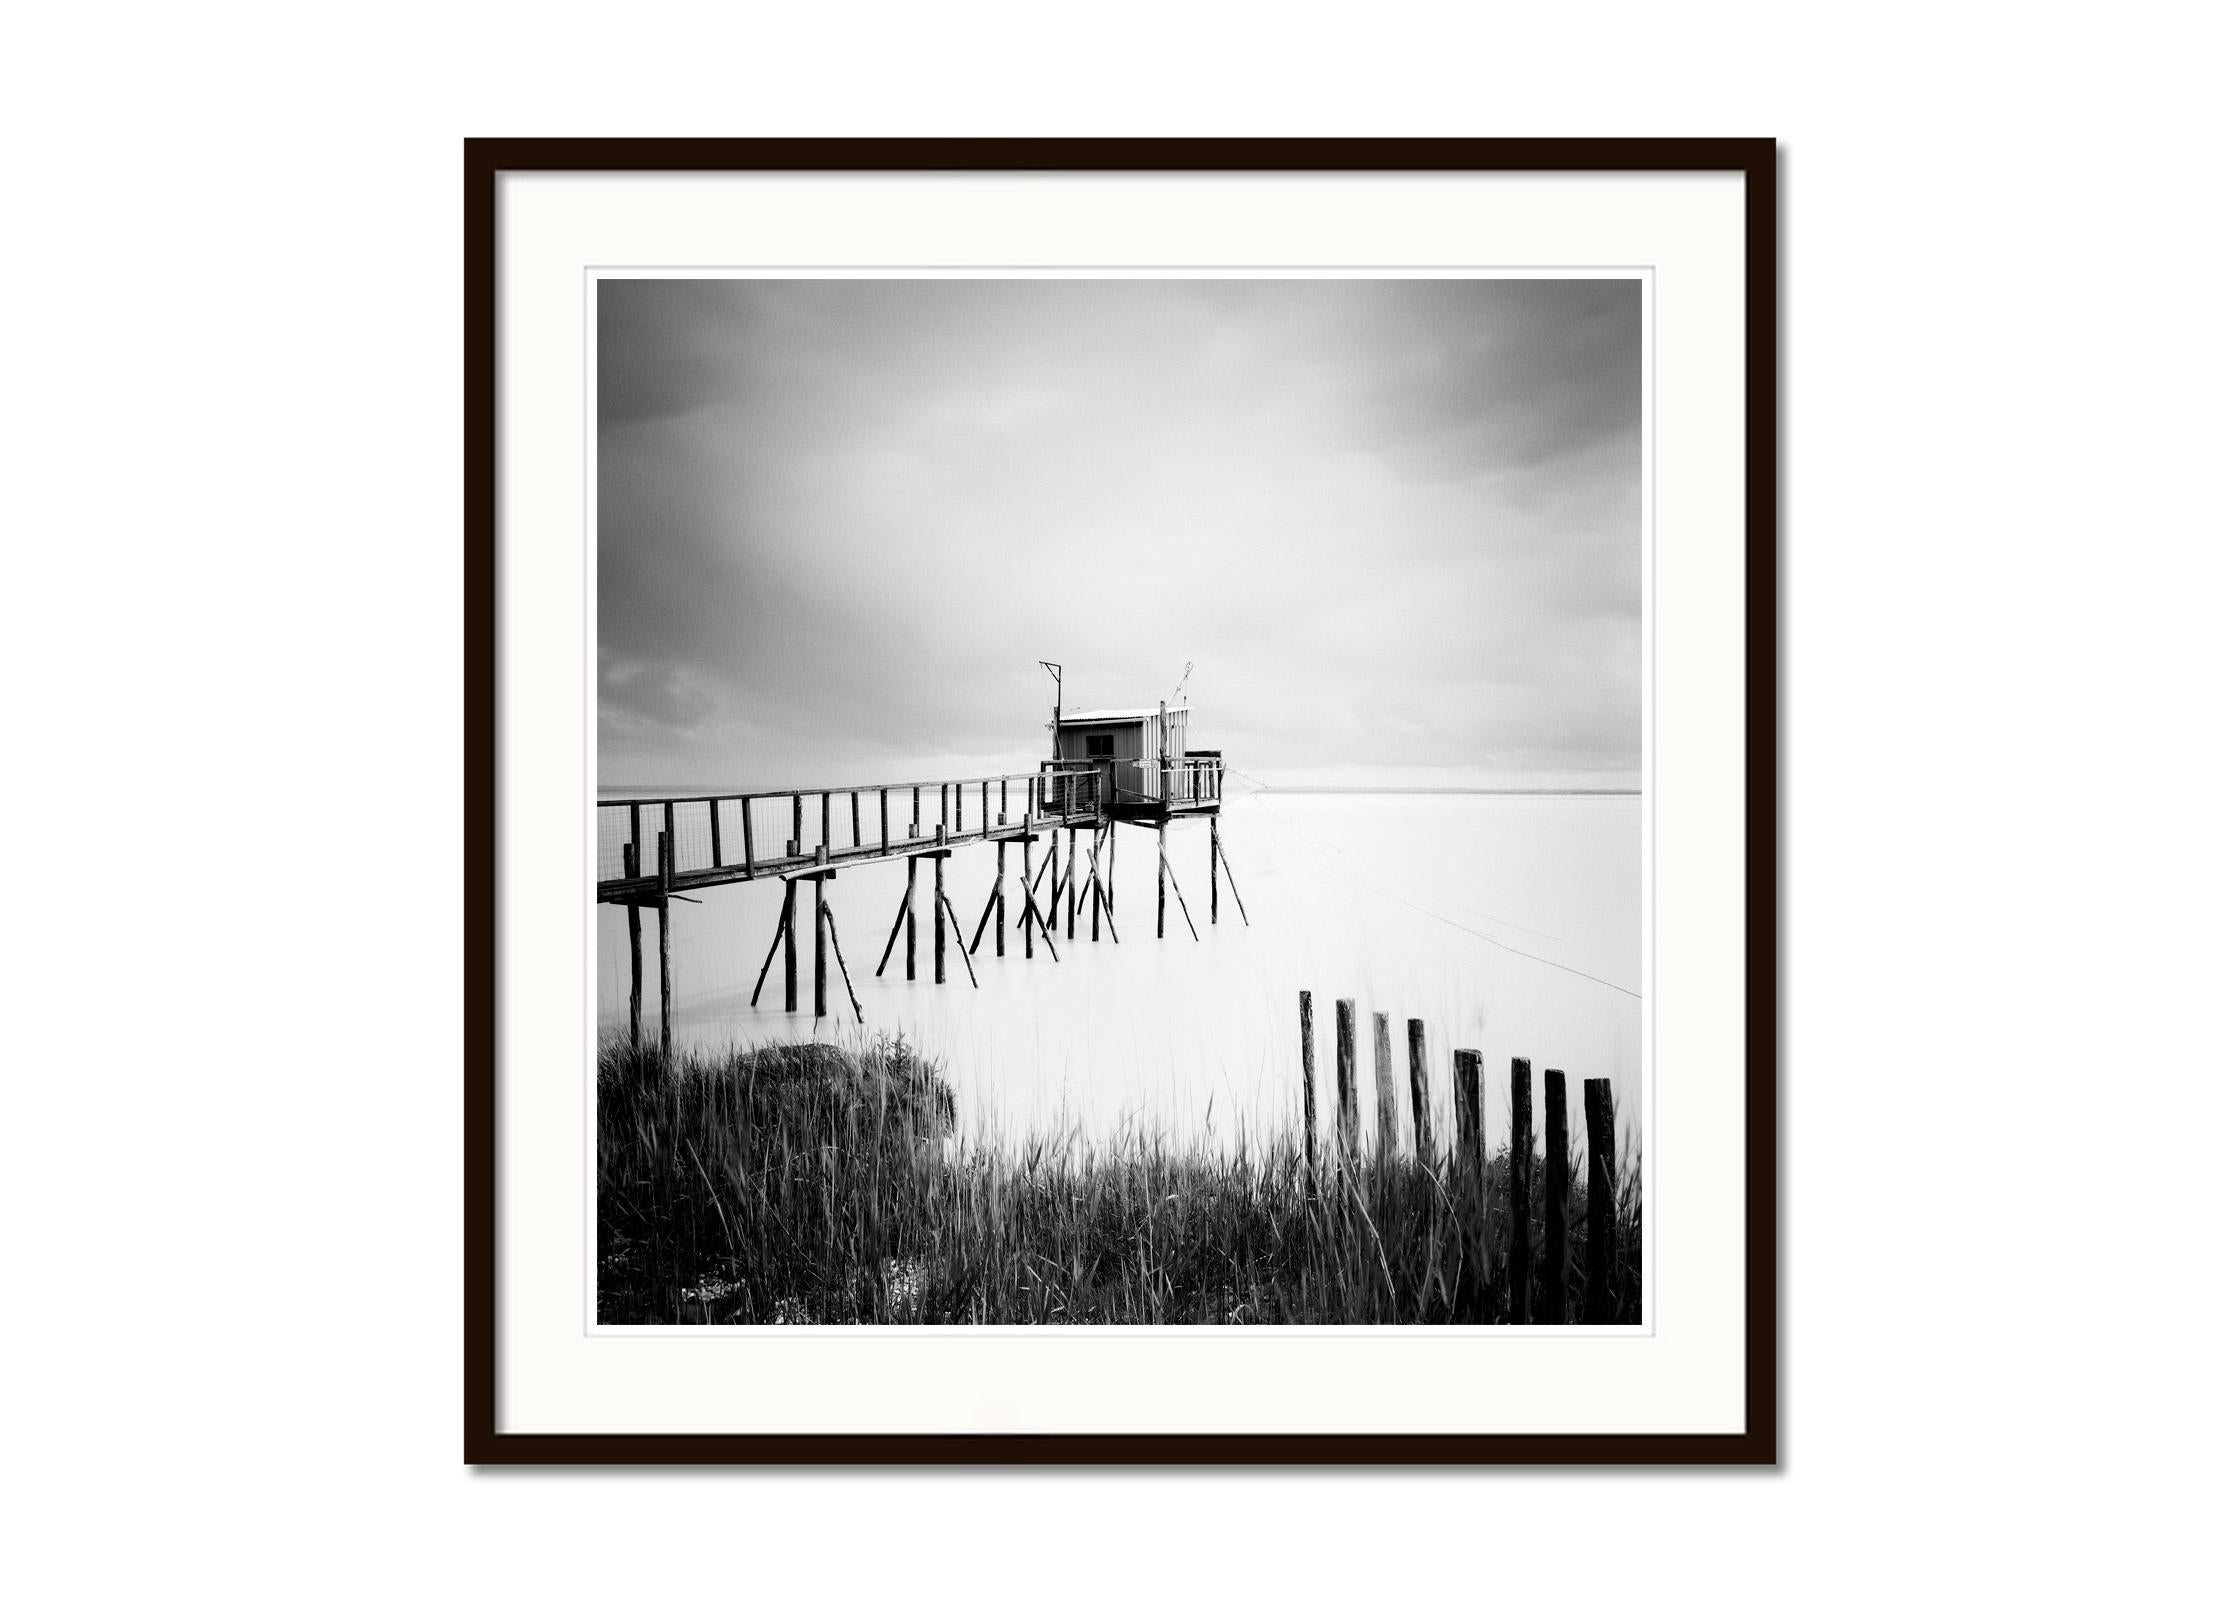 Stilt House, Fishing, France, long exposure, black and white, photography, print - Gray Landscape Photograph by Gerald Berghammer